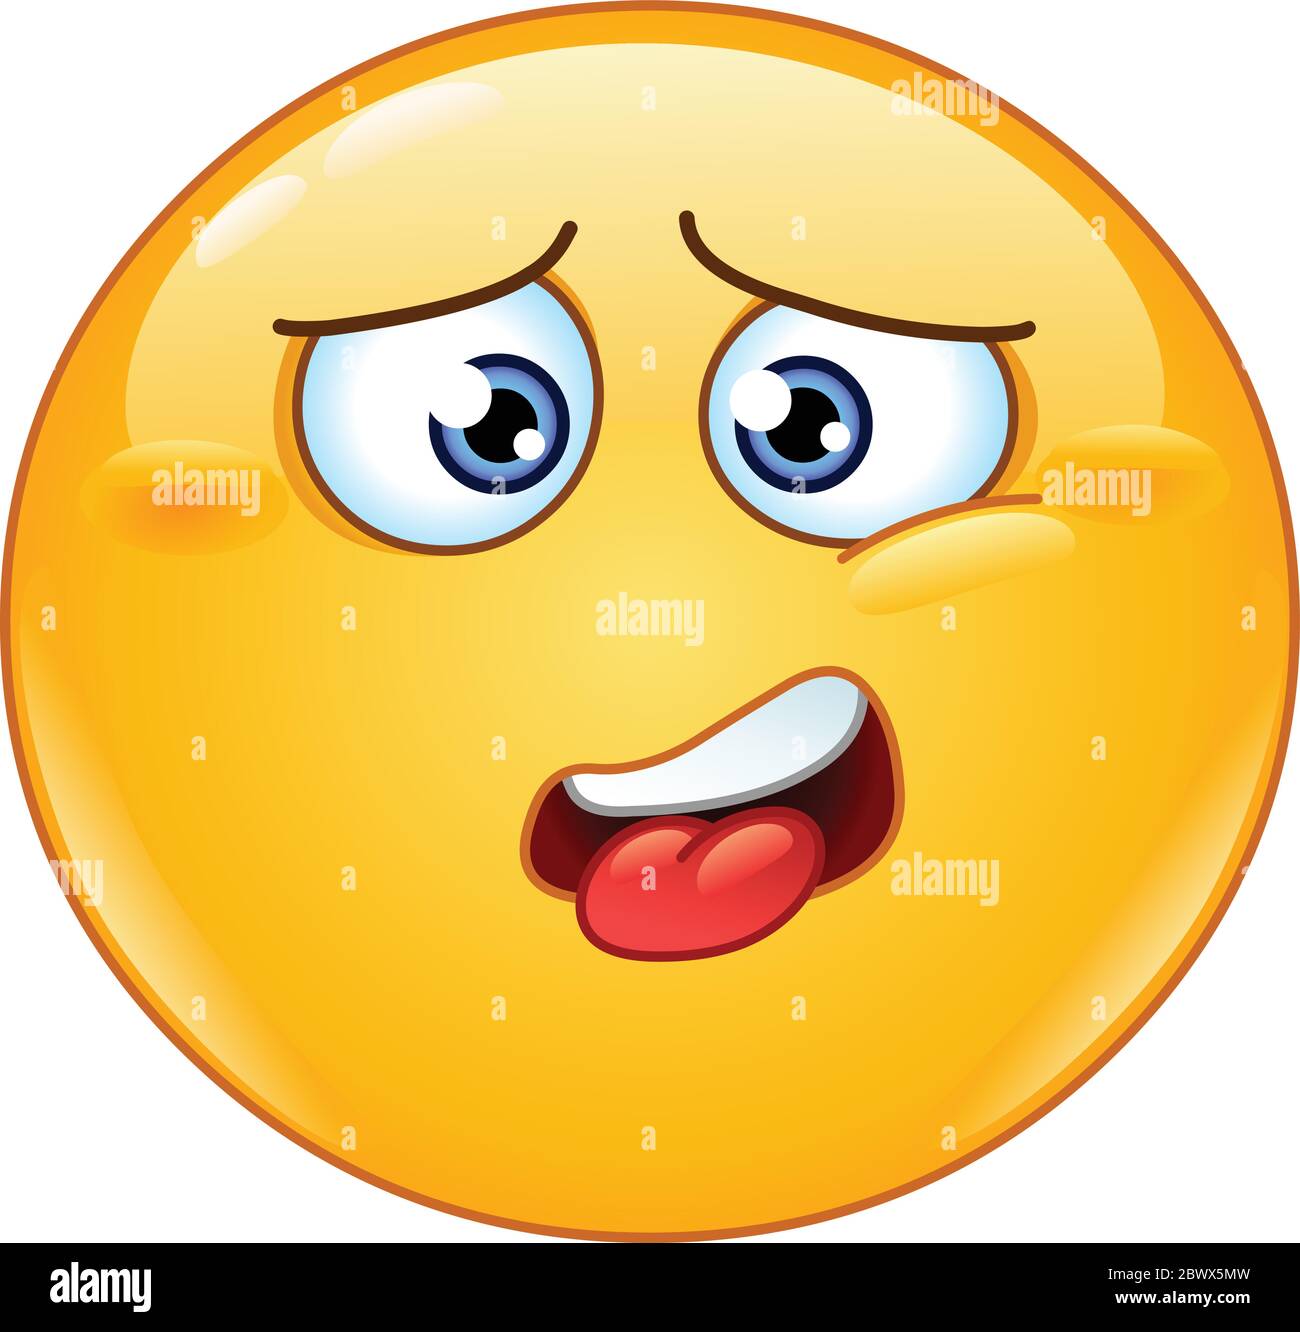 Drained, annoyed, tired, fed up with or be sick of emoticon having a tongue sticking out slightly Stock Vector